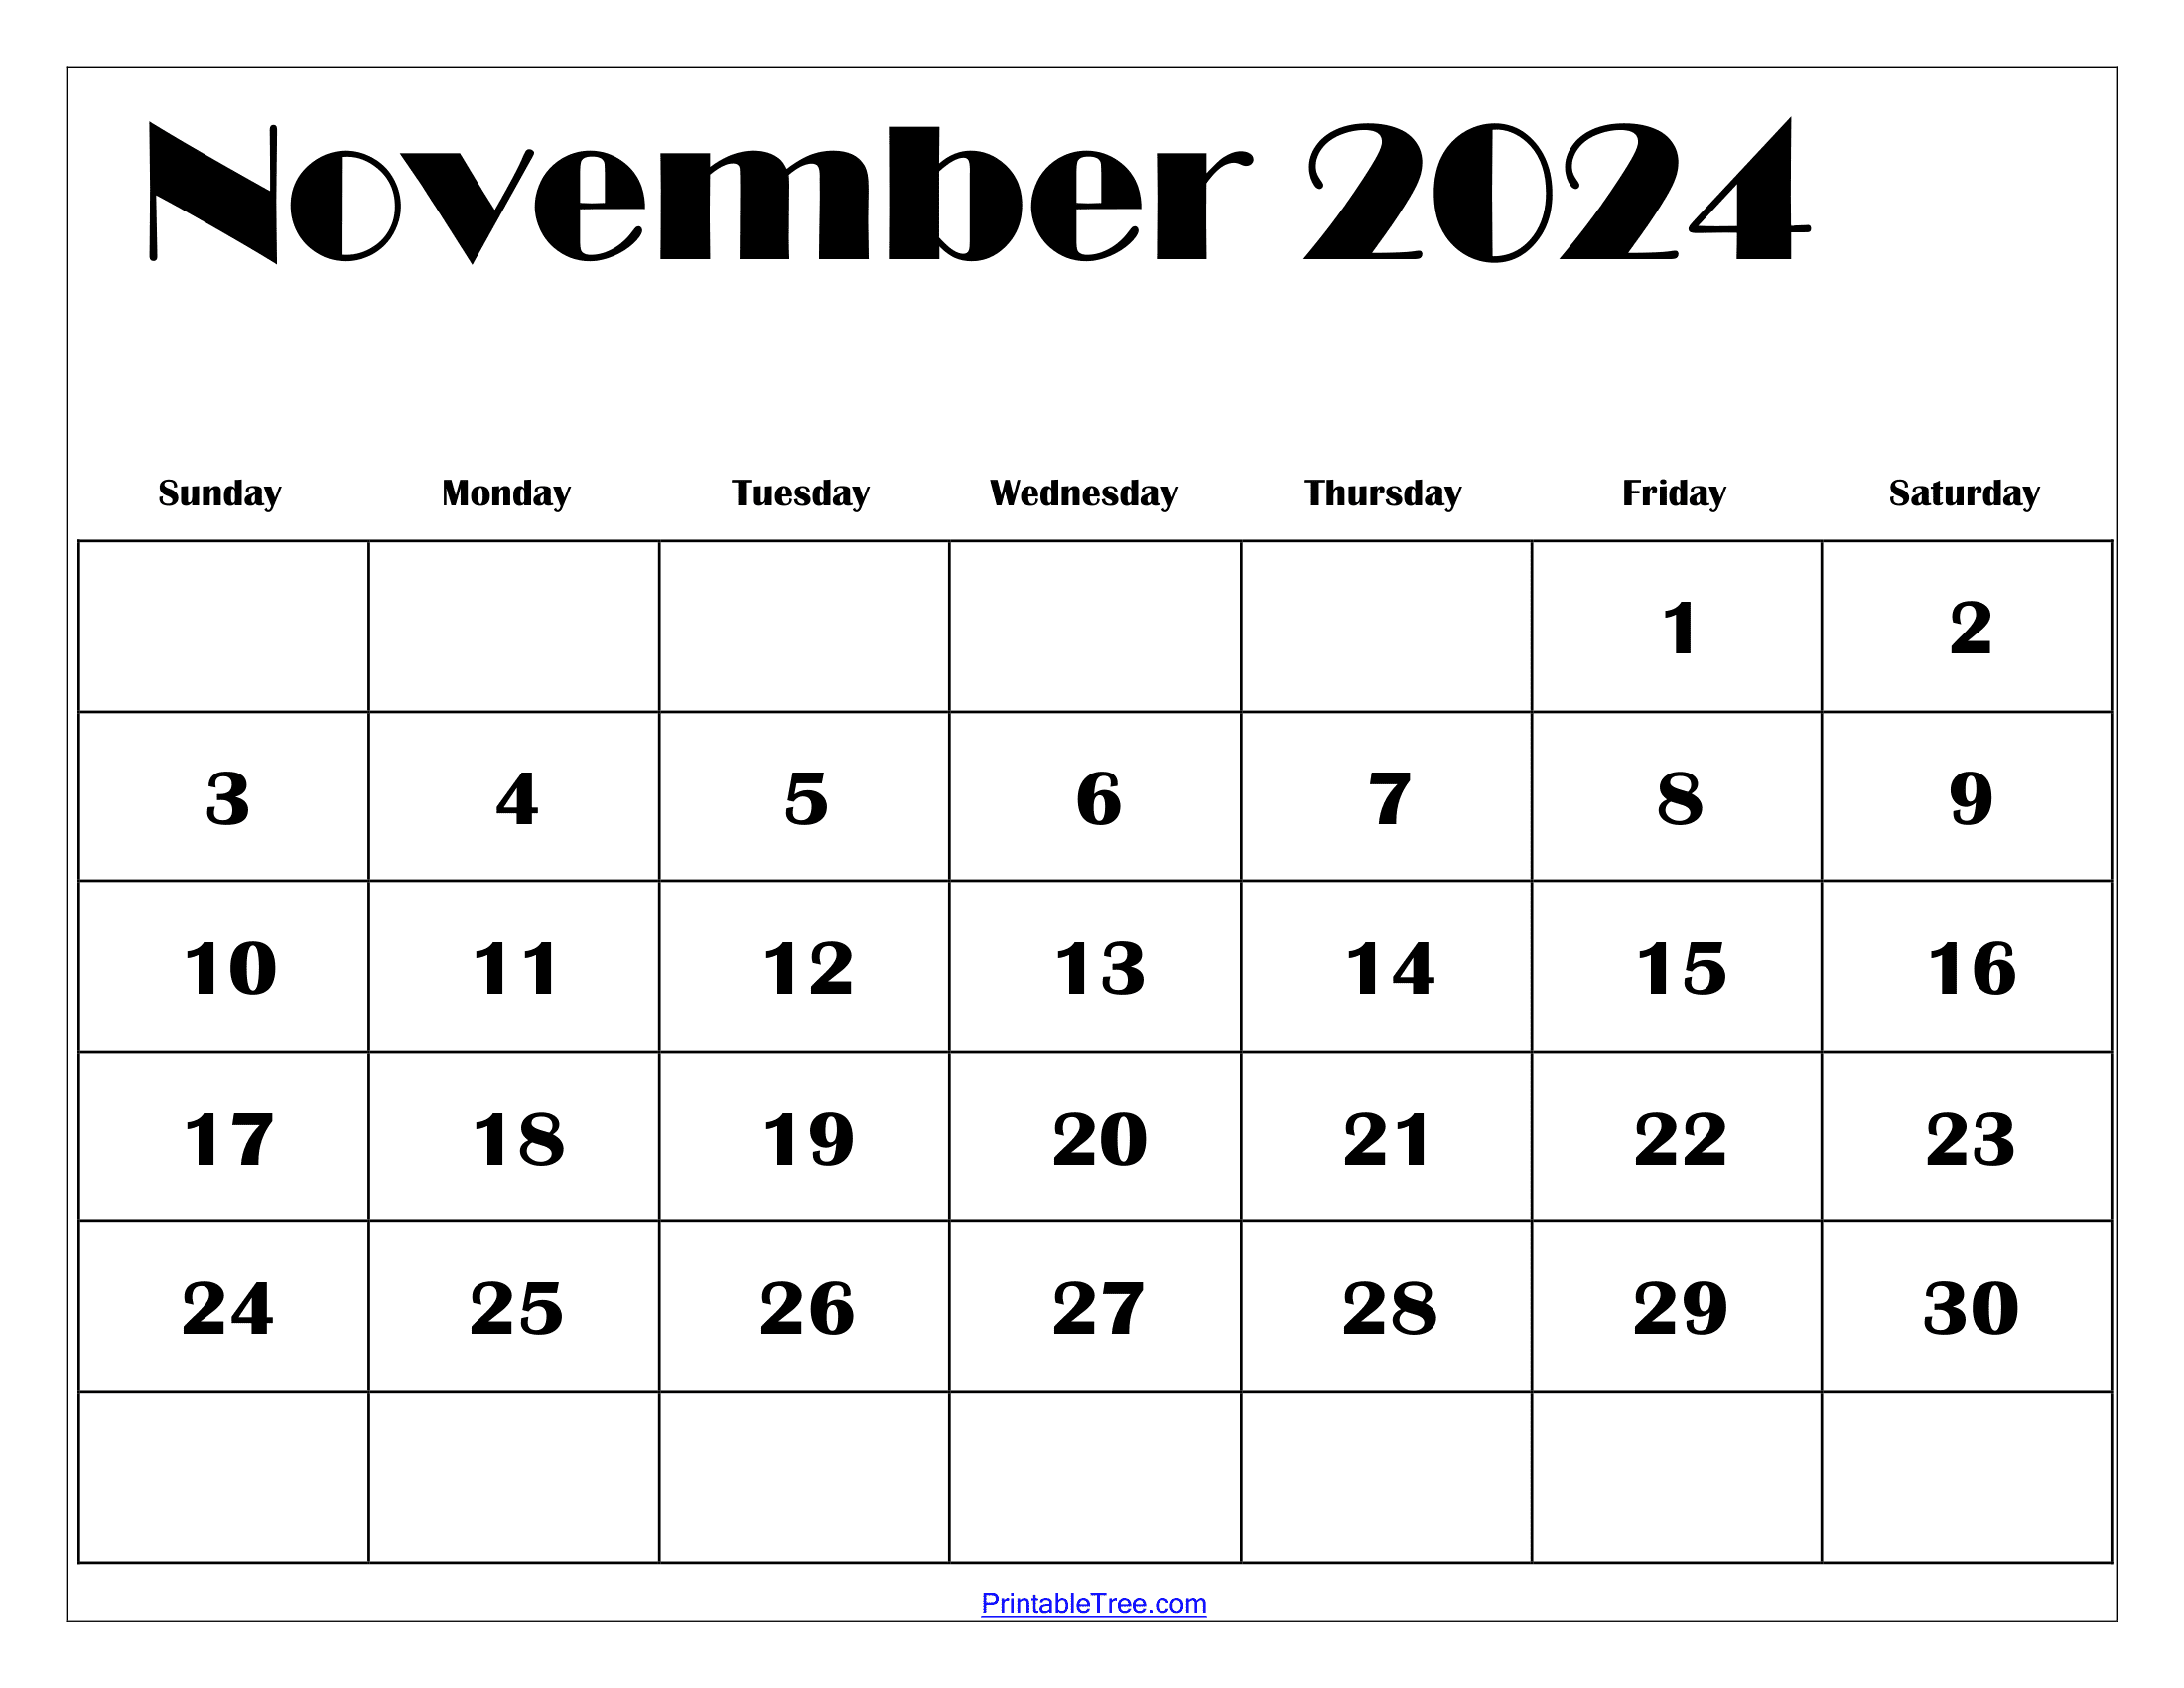 November 2024 Calendar Printable Pdf Template With Holidays intended for Free Printable Appointment Calendar November 2024 Calendar